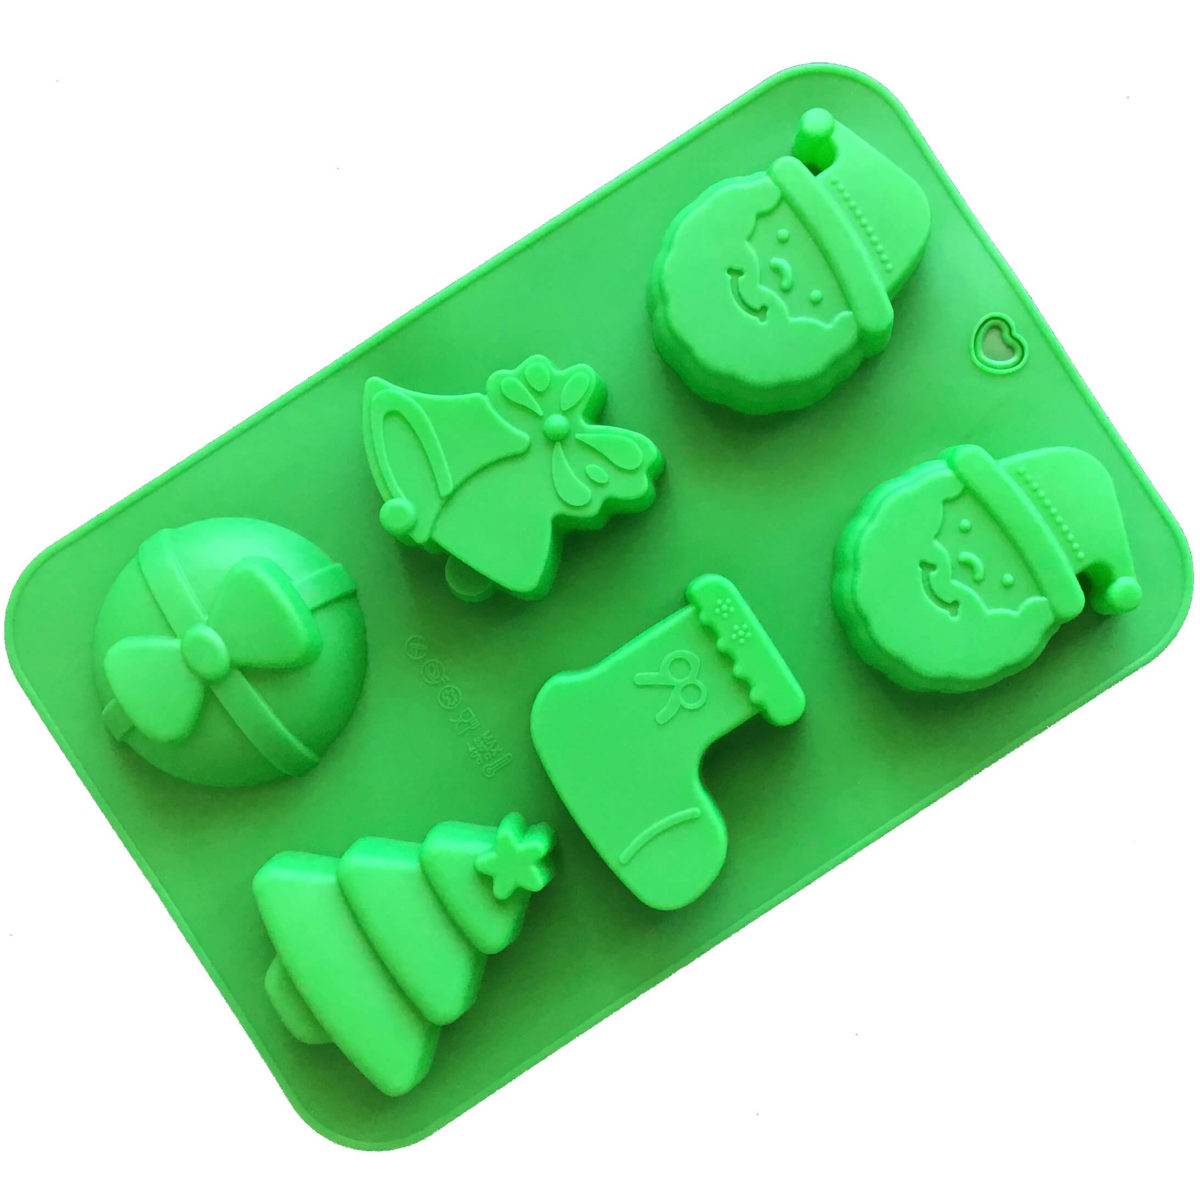 green christmas themed silcone mould with santa, stocking, bells, bauble and christmas tree cavities